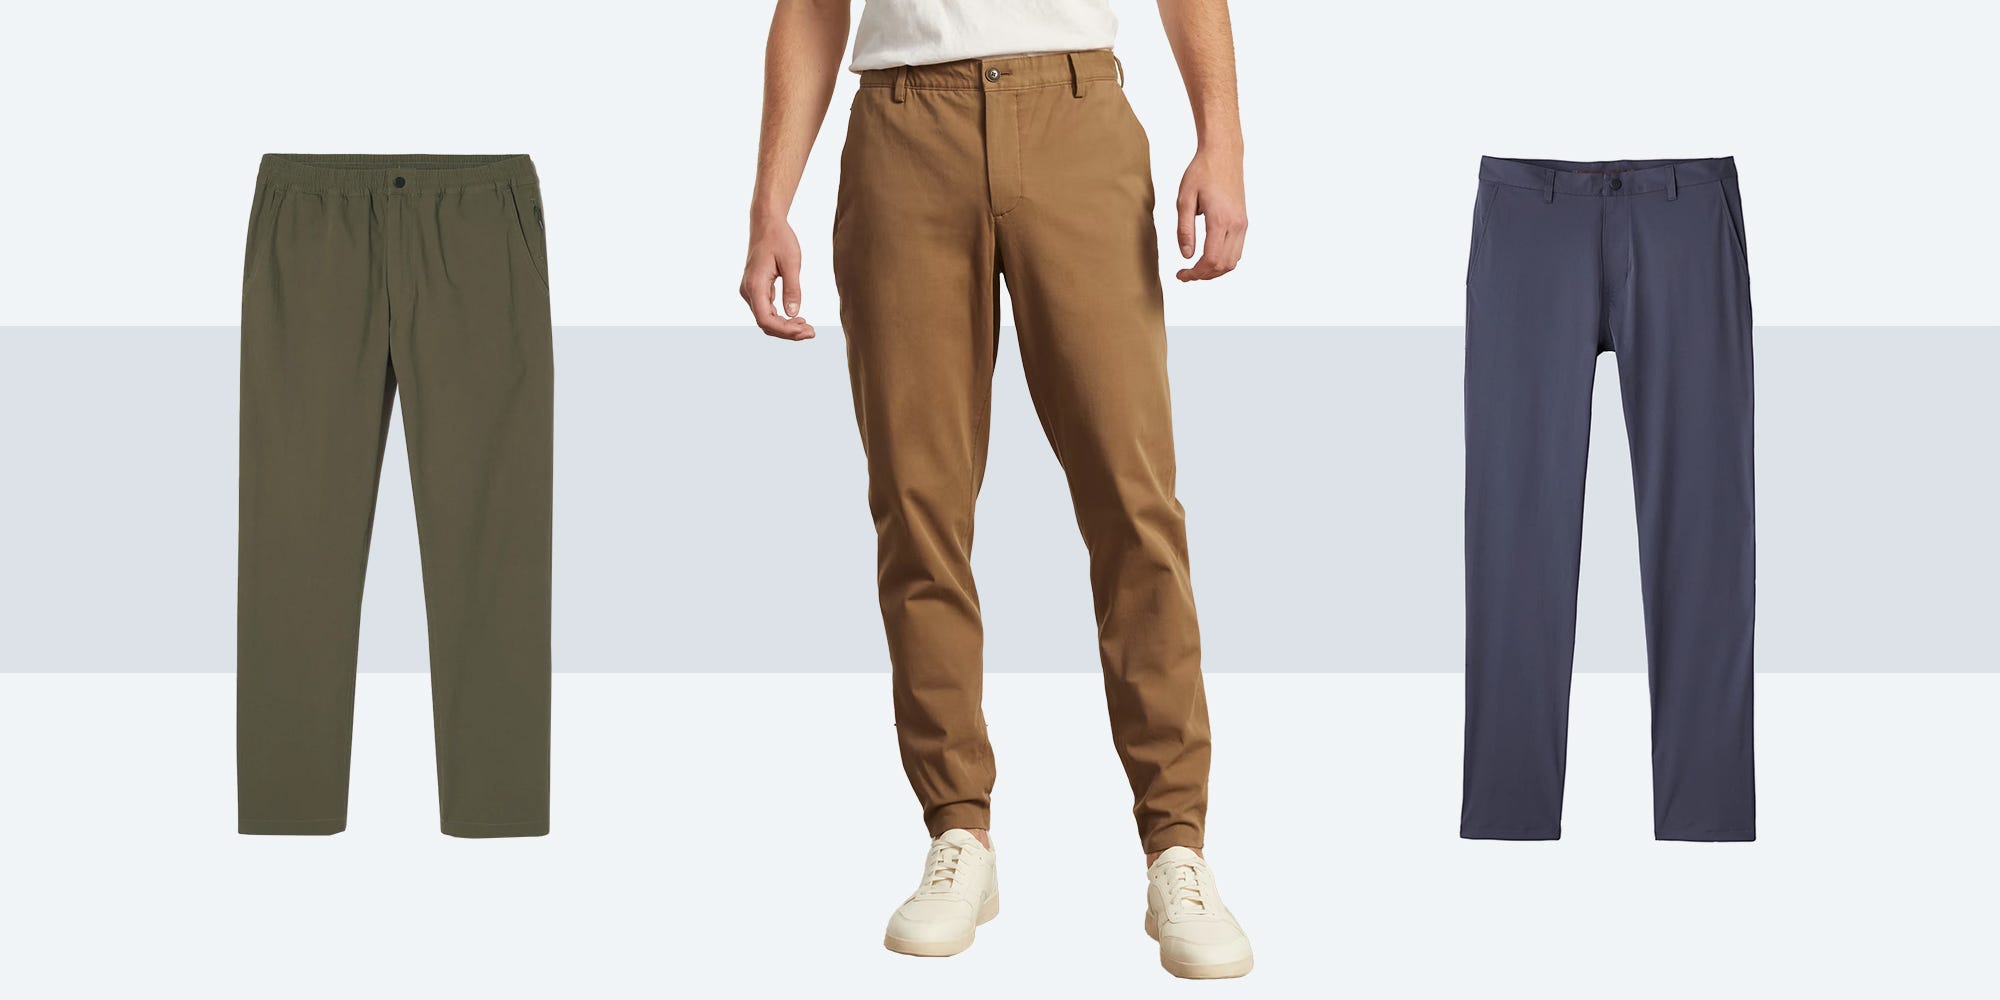 What are the best brands known for producing durable and stylish cargo pants?  - Quora